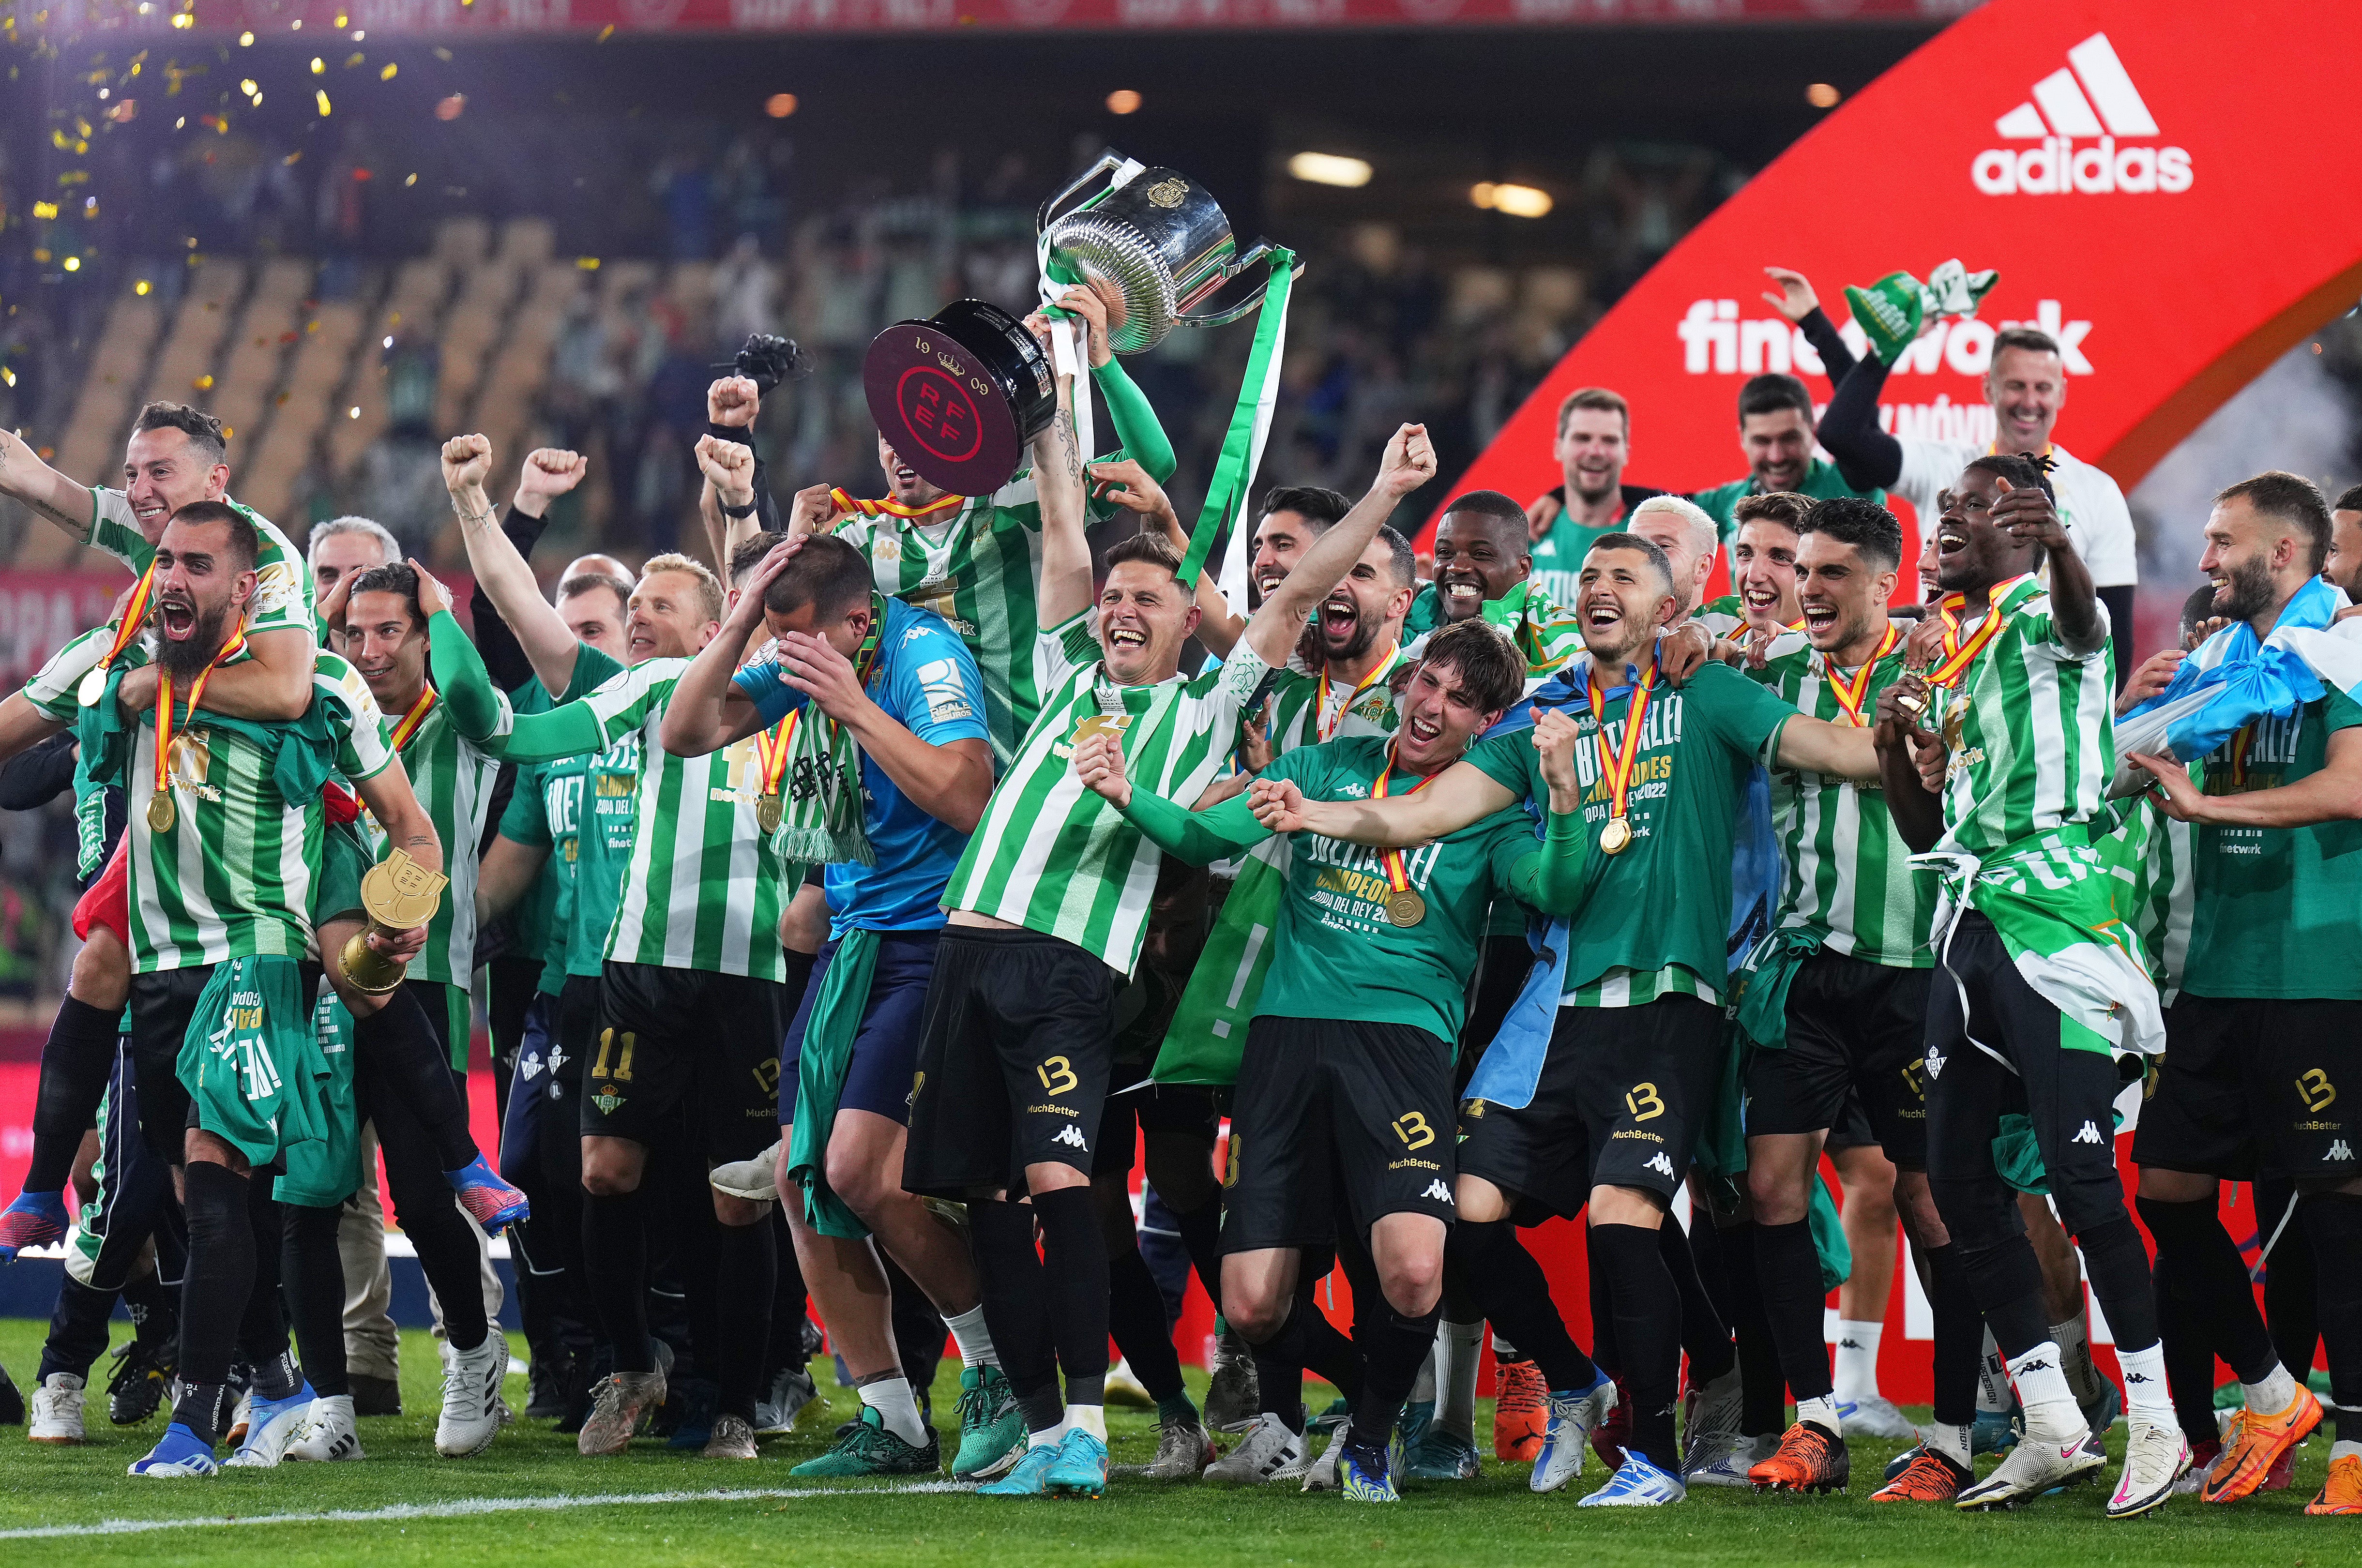 Real Betis edged a cup final penalty shootout